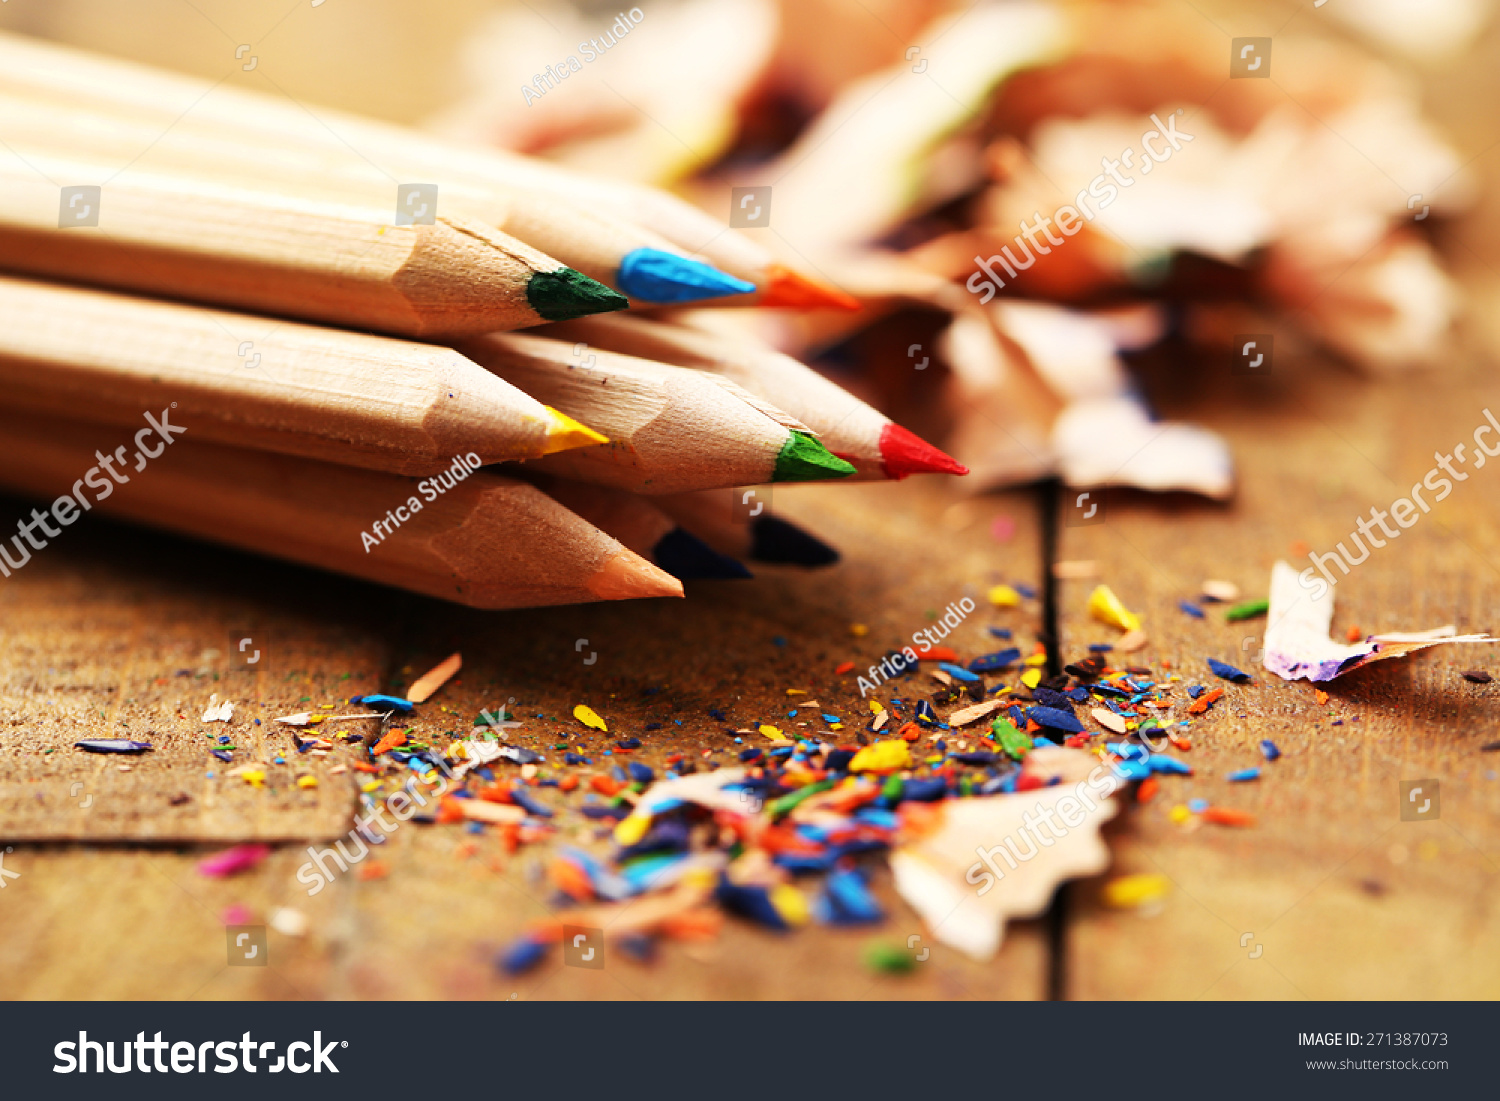 Wooden colorful pencils with sharpening shavings, on wooden table #271387073